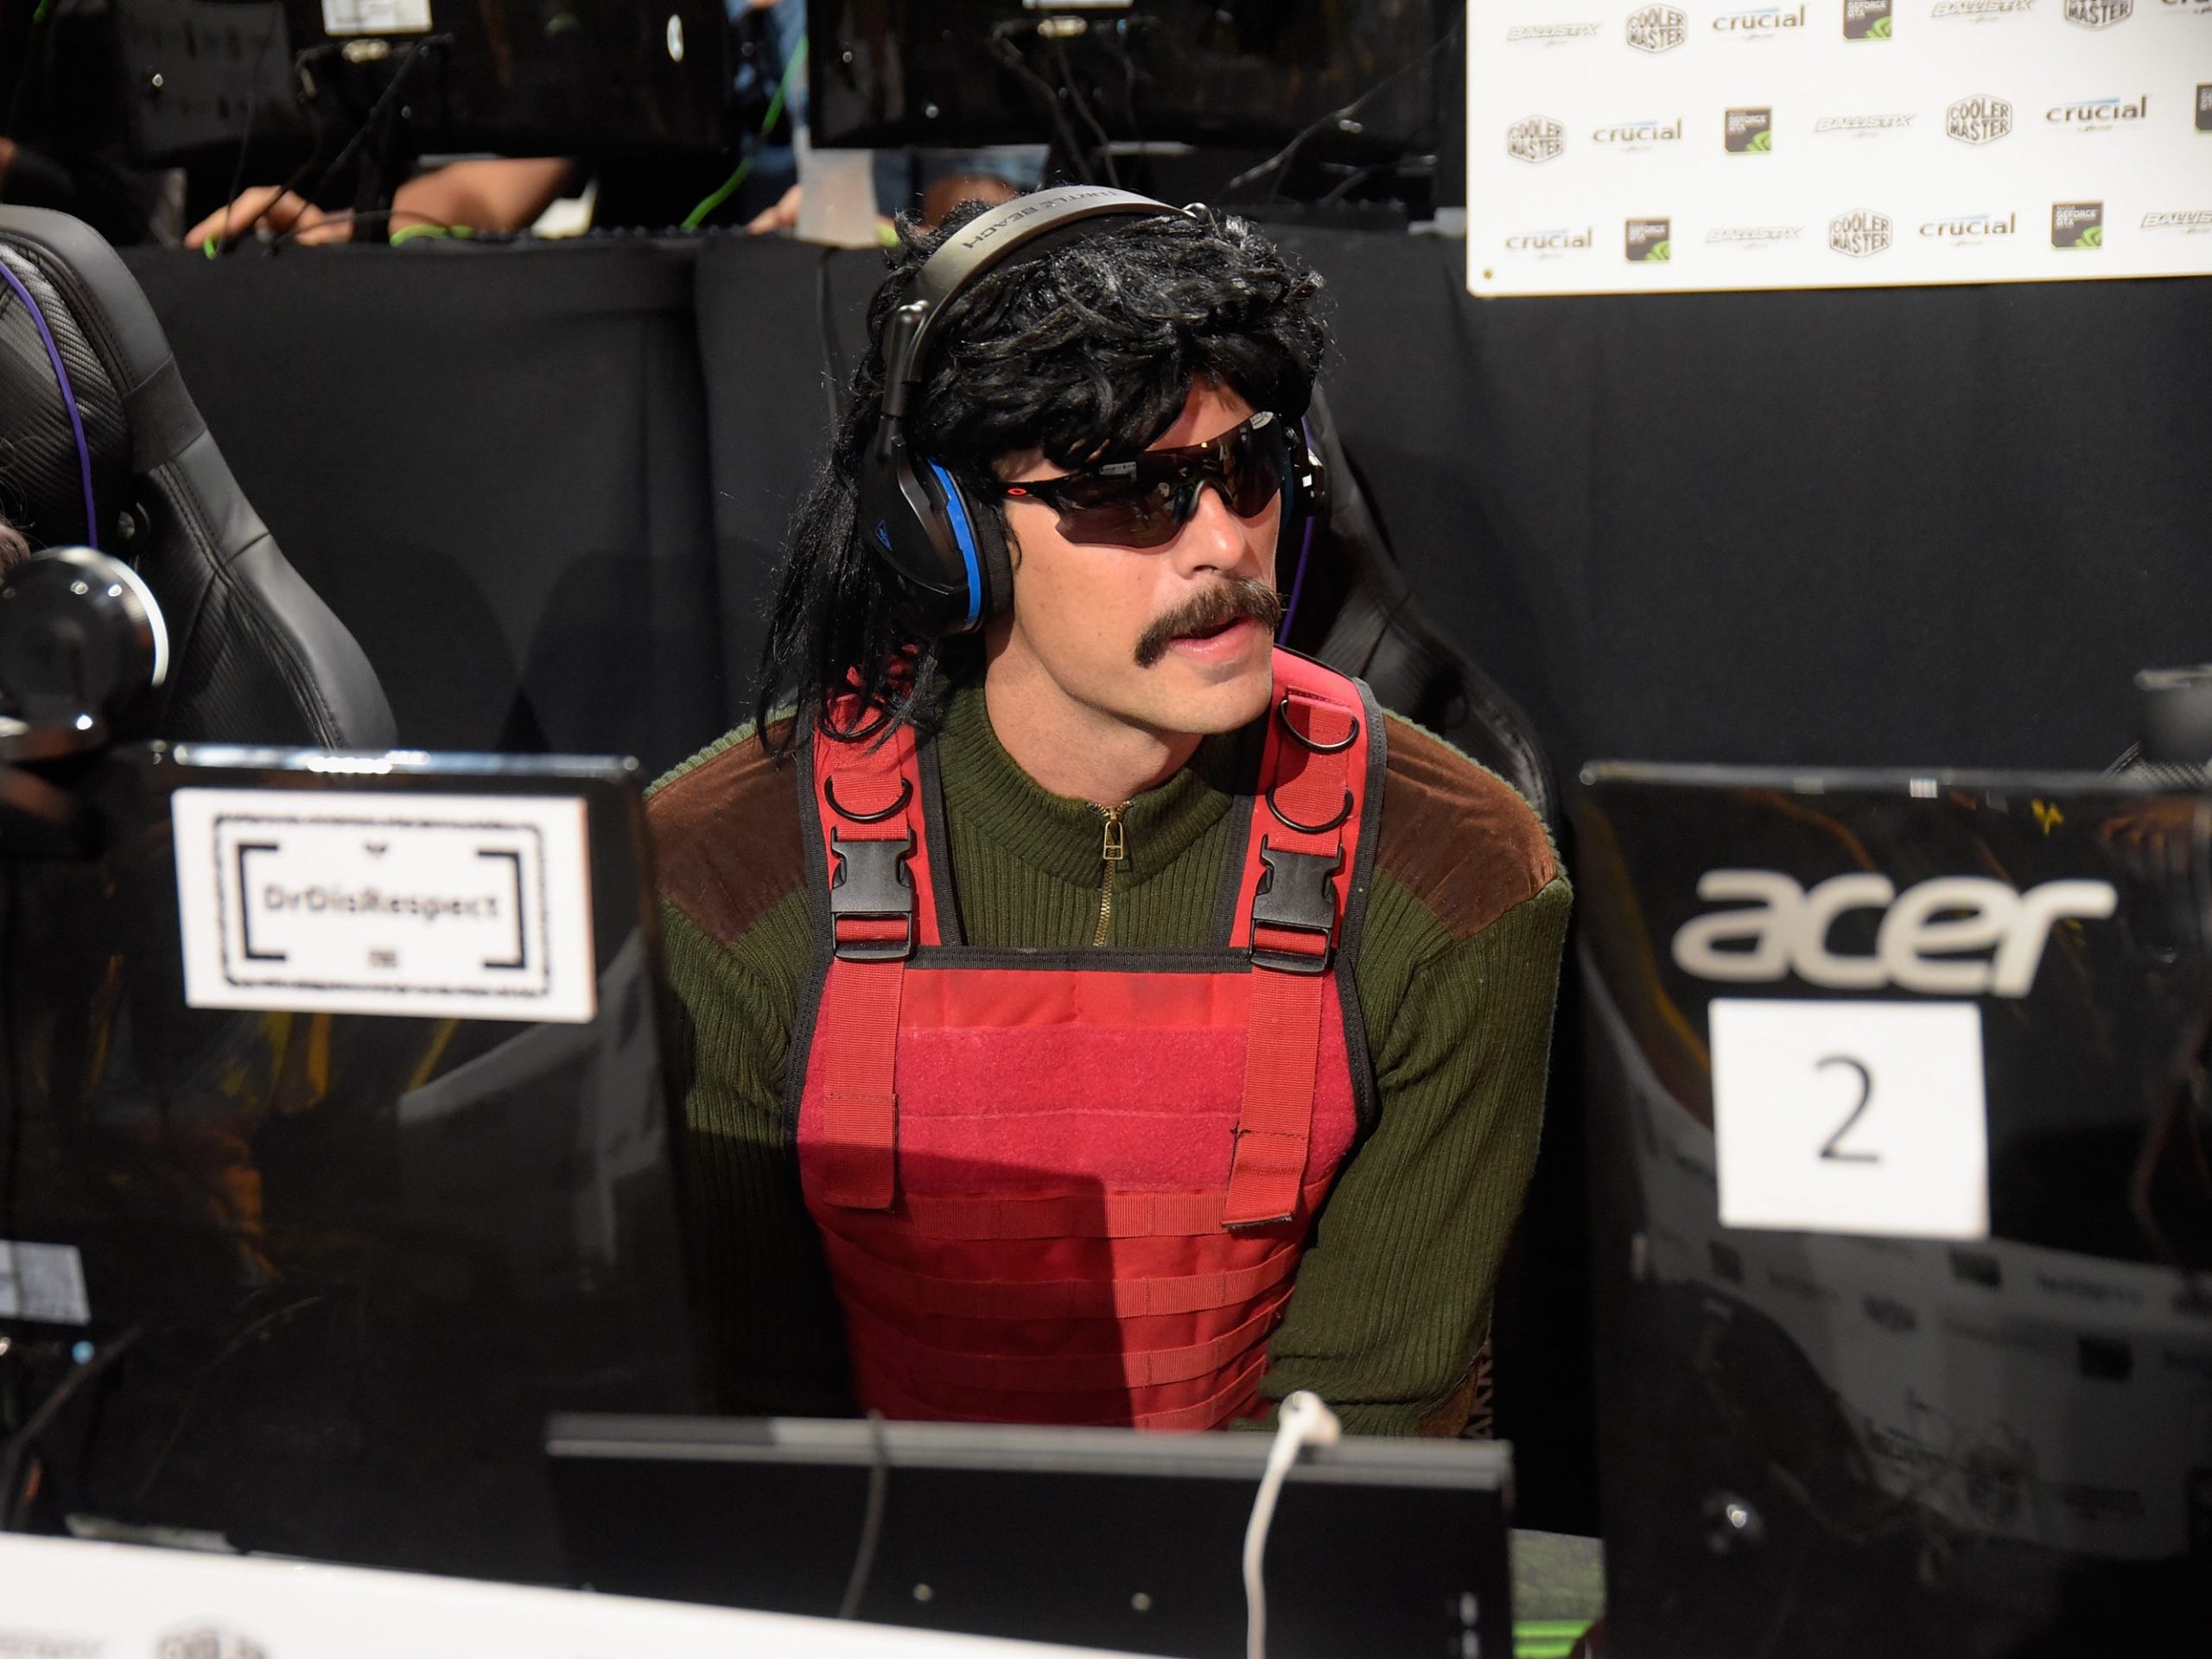 DrDisrespect streaming in 2018 at a Twitch event